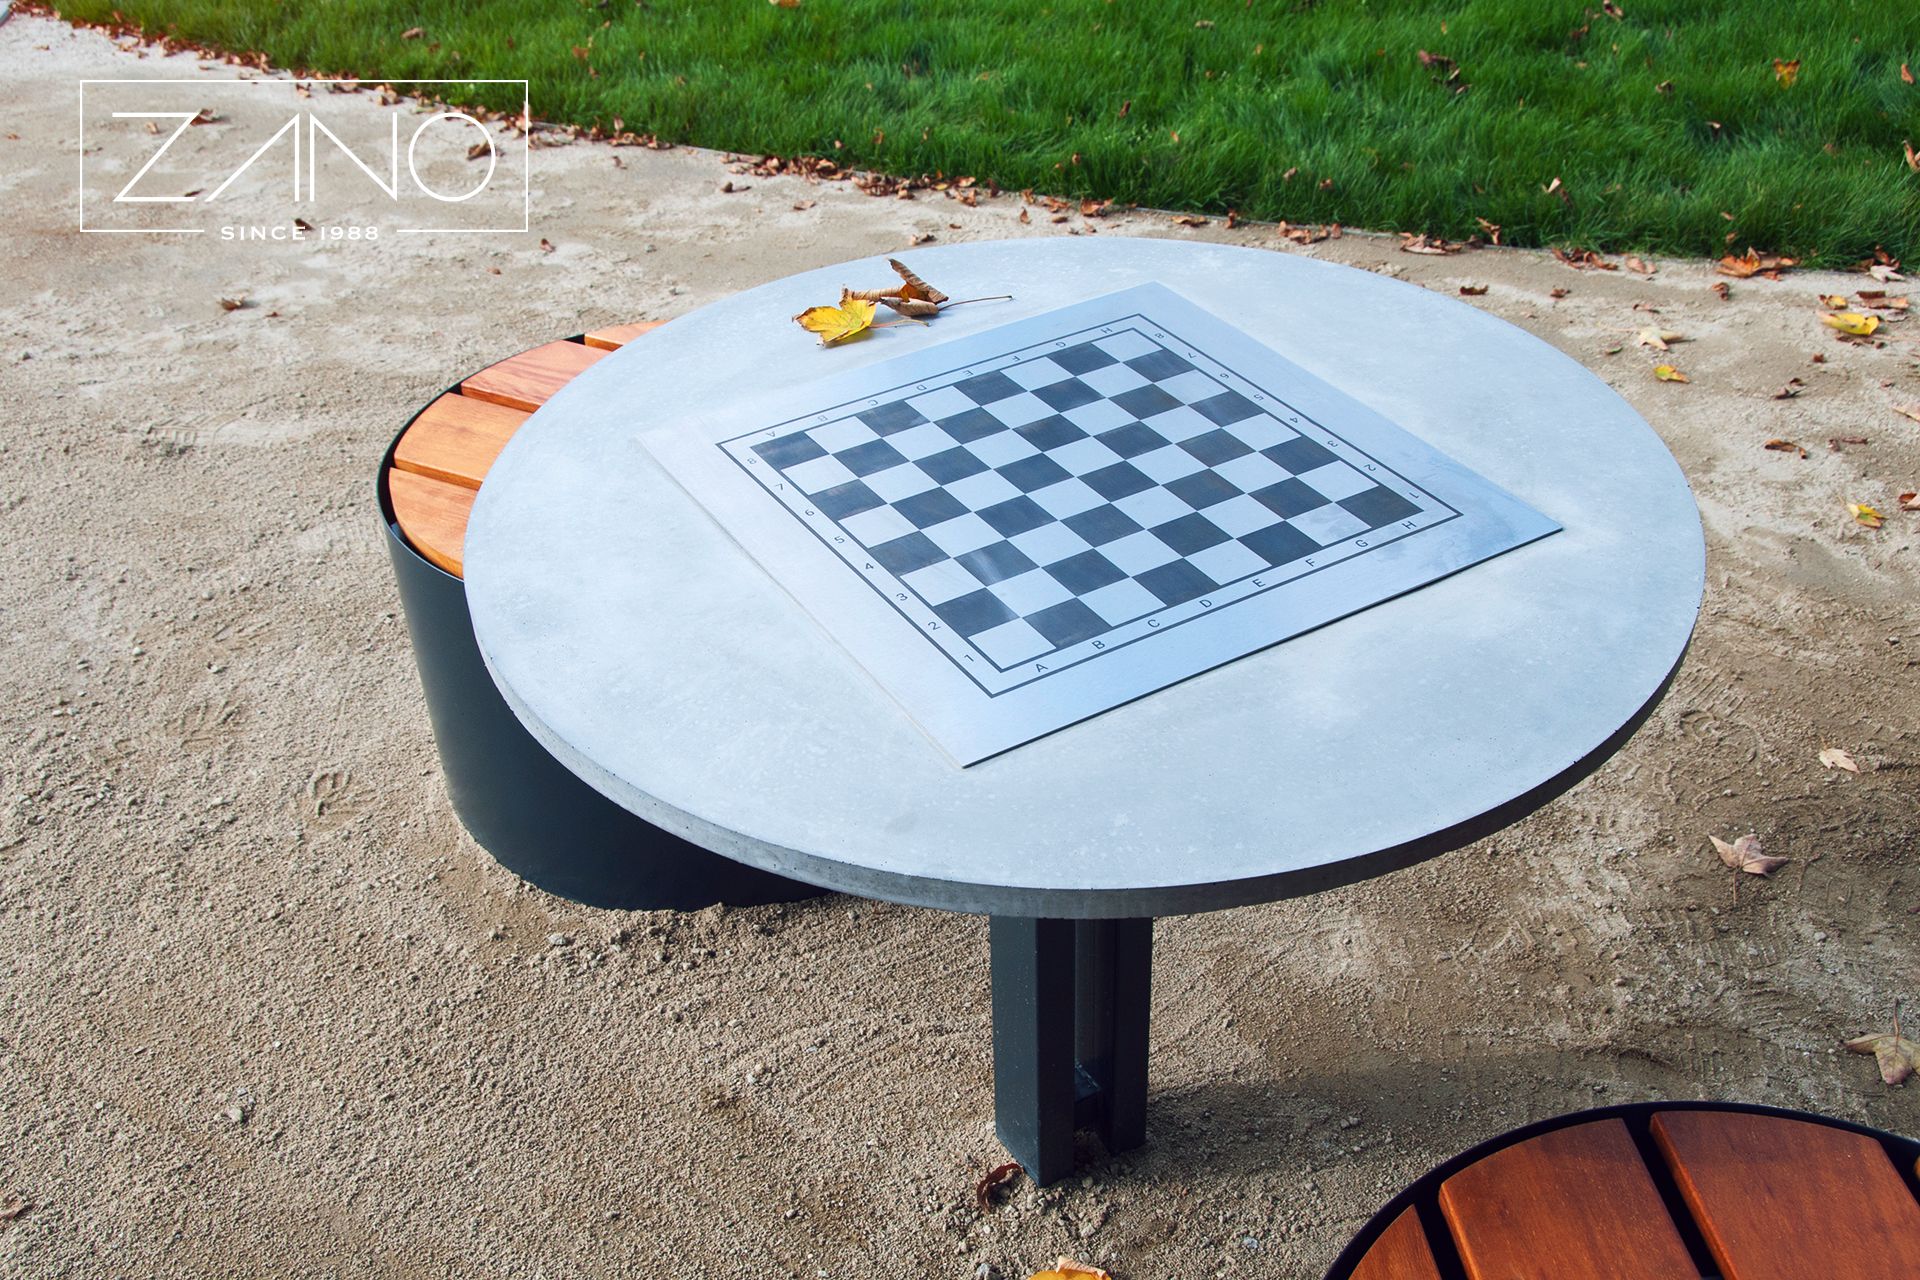 Concrete table with stainless steel chessboard